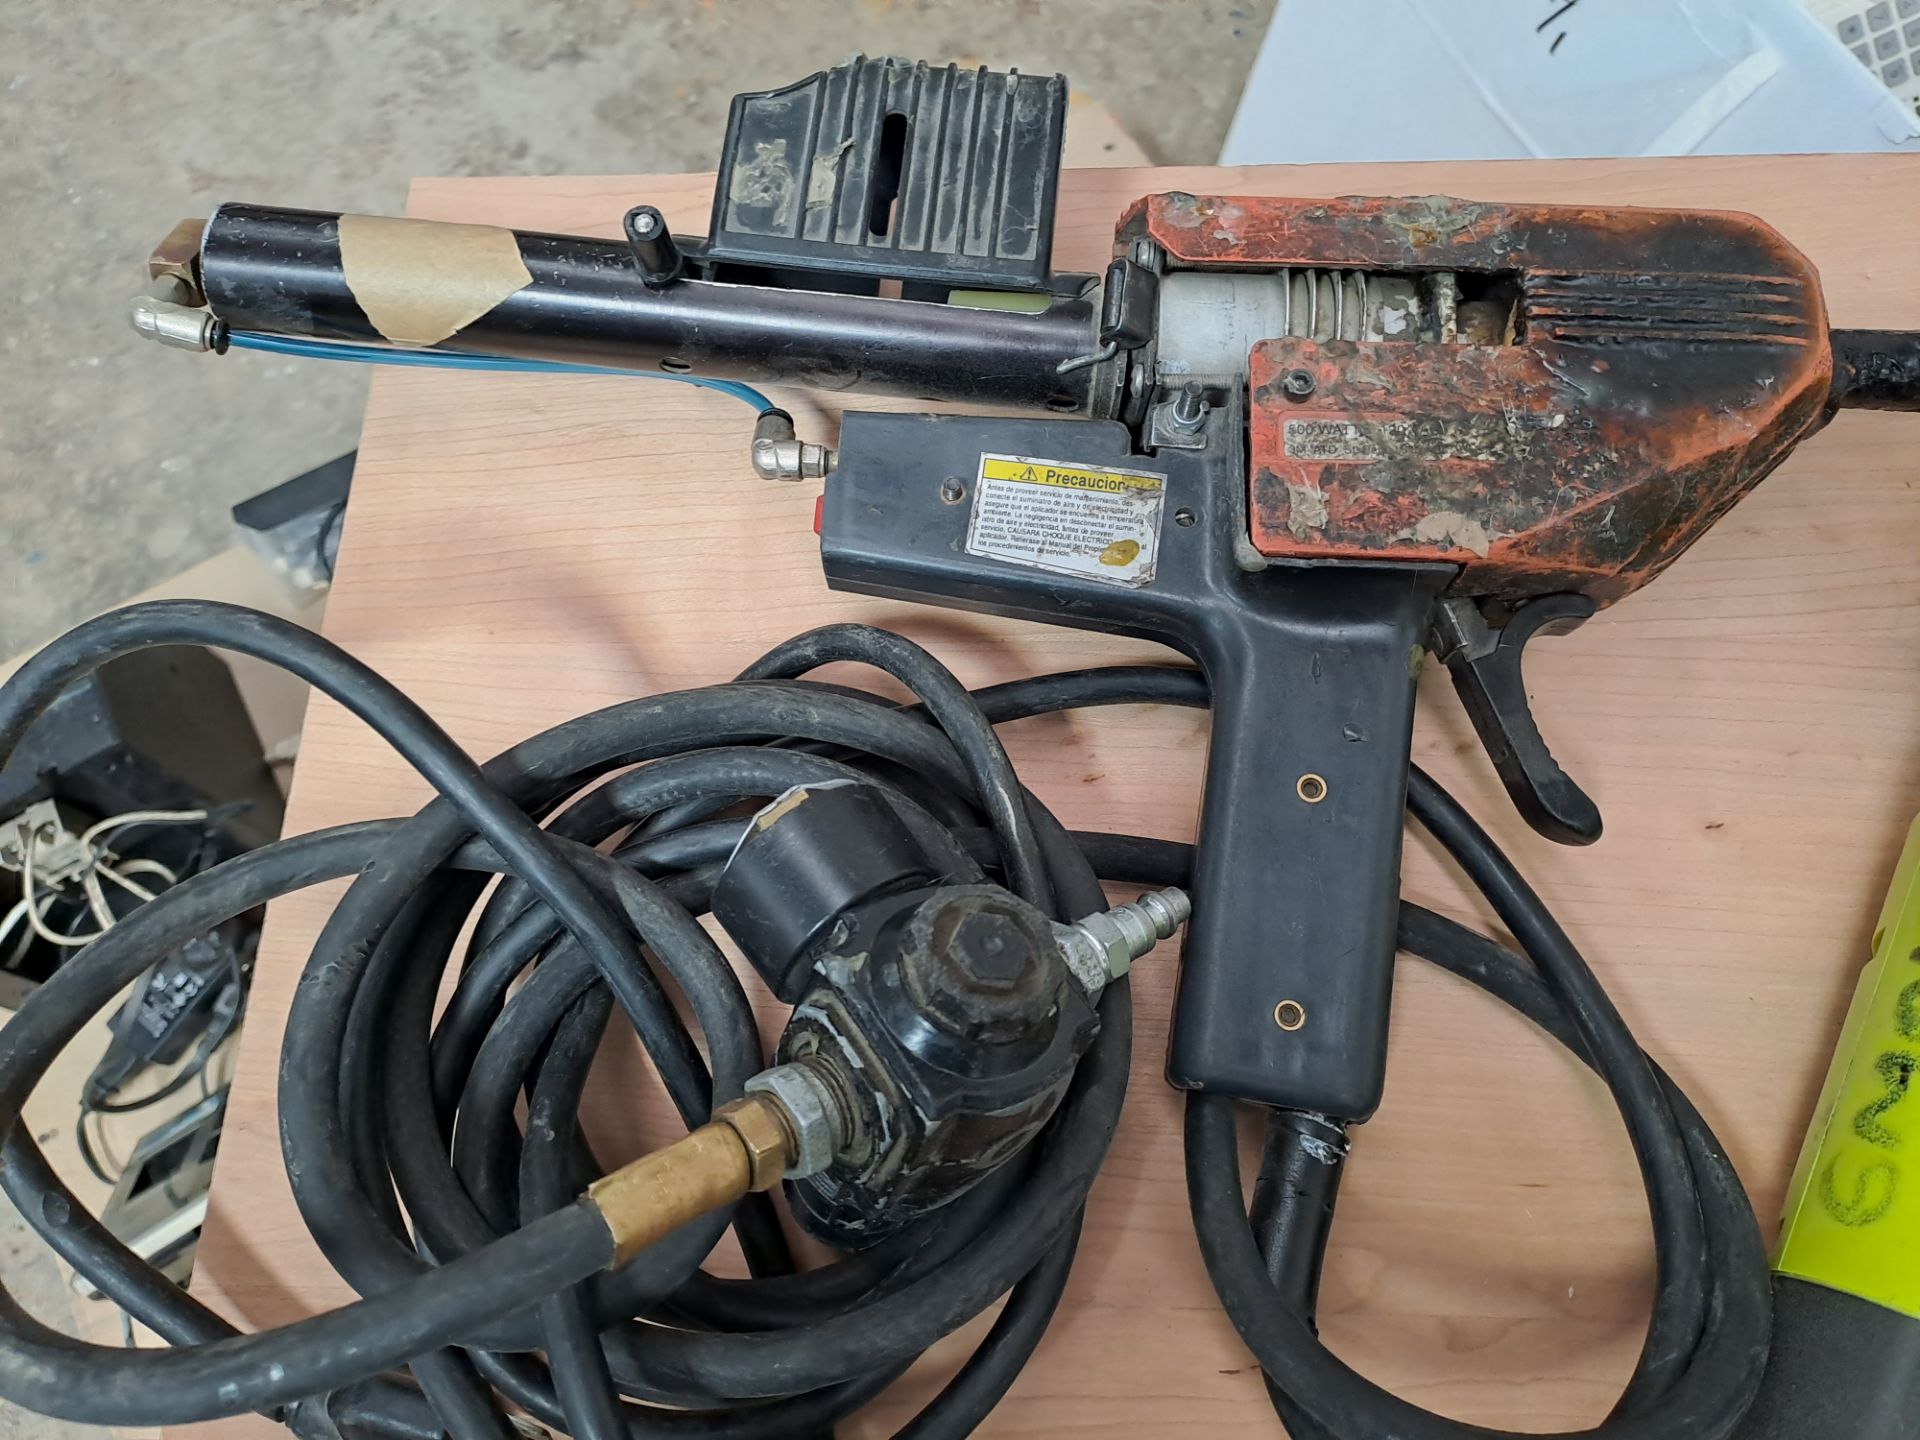 Lot of 4 pieces contains: 1 Porter electric sander with dust collector; 1 Ryobi wood saw without ba - Image 10 of 14